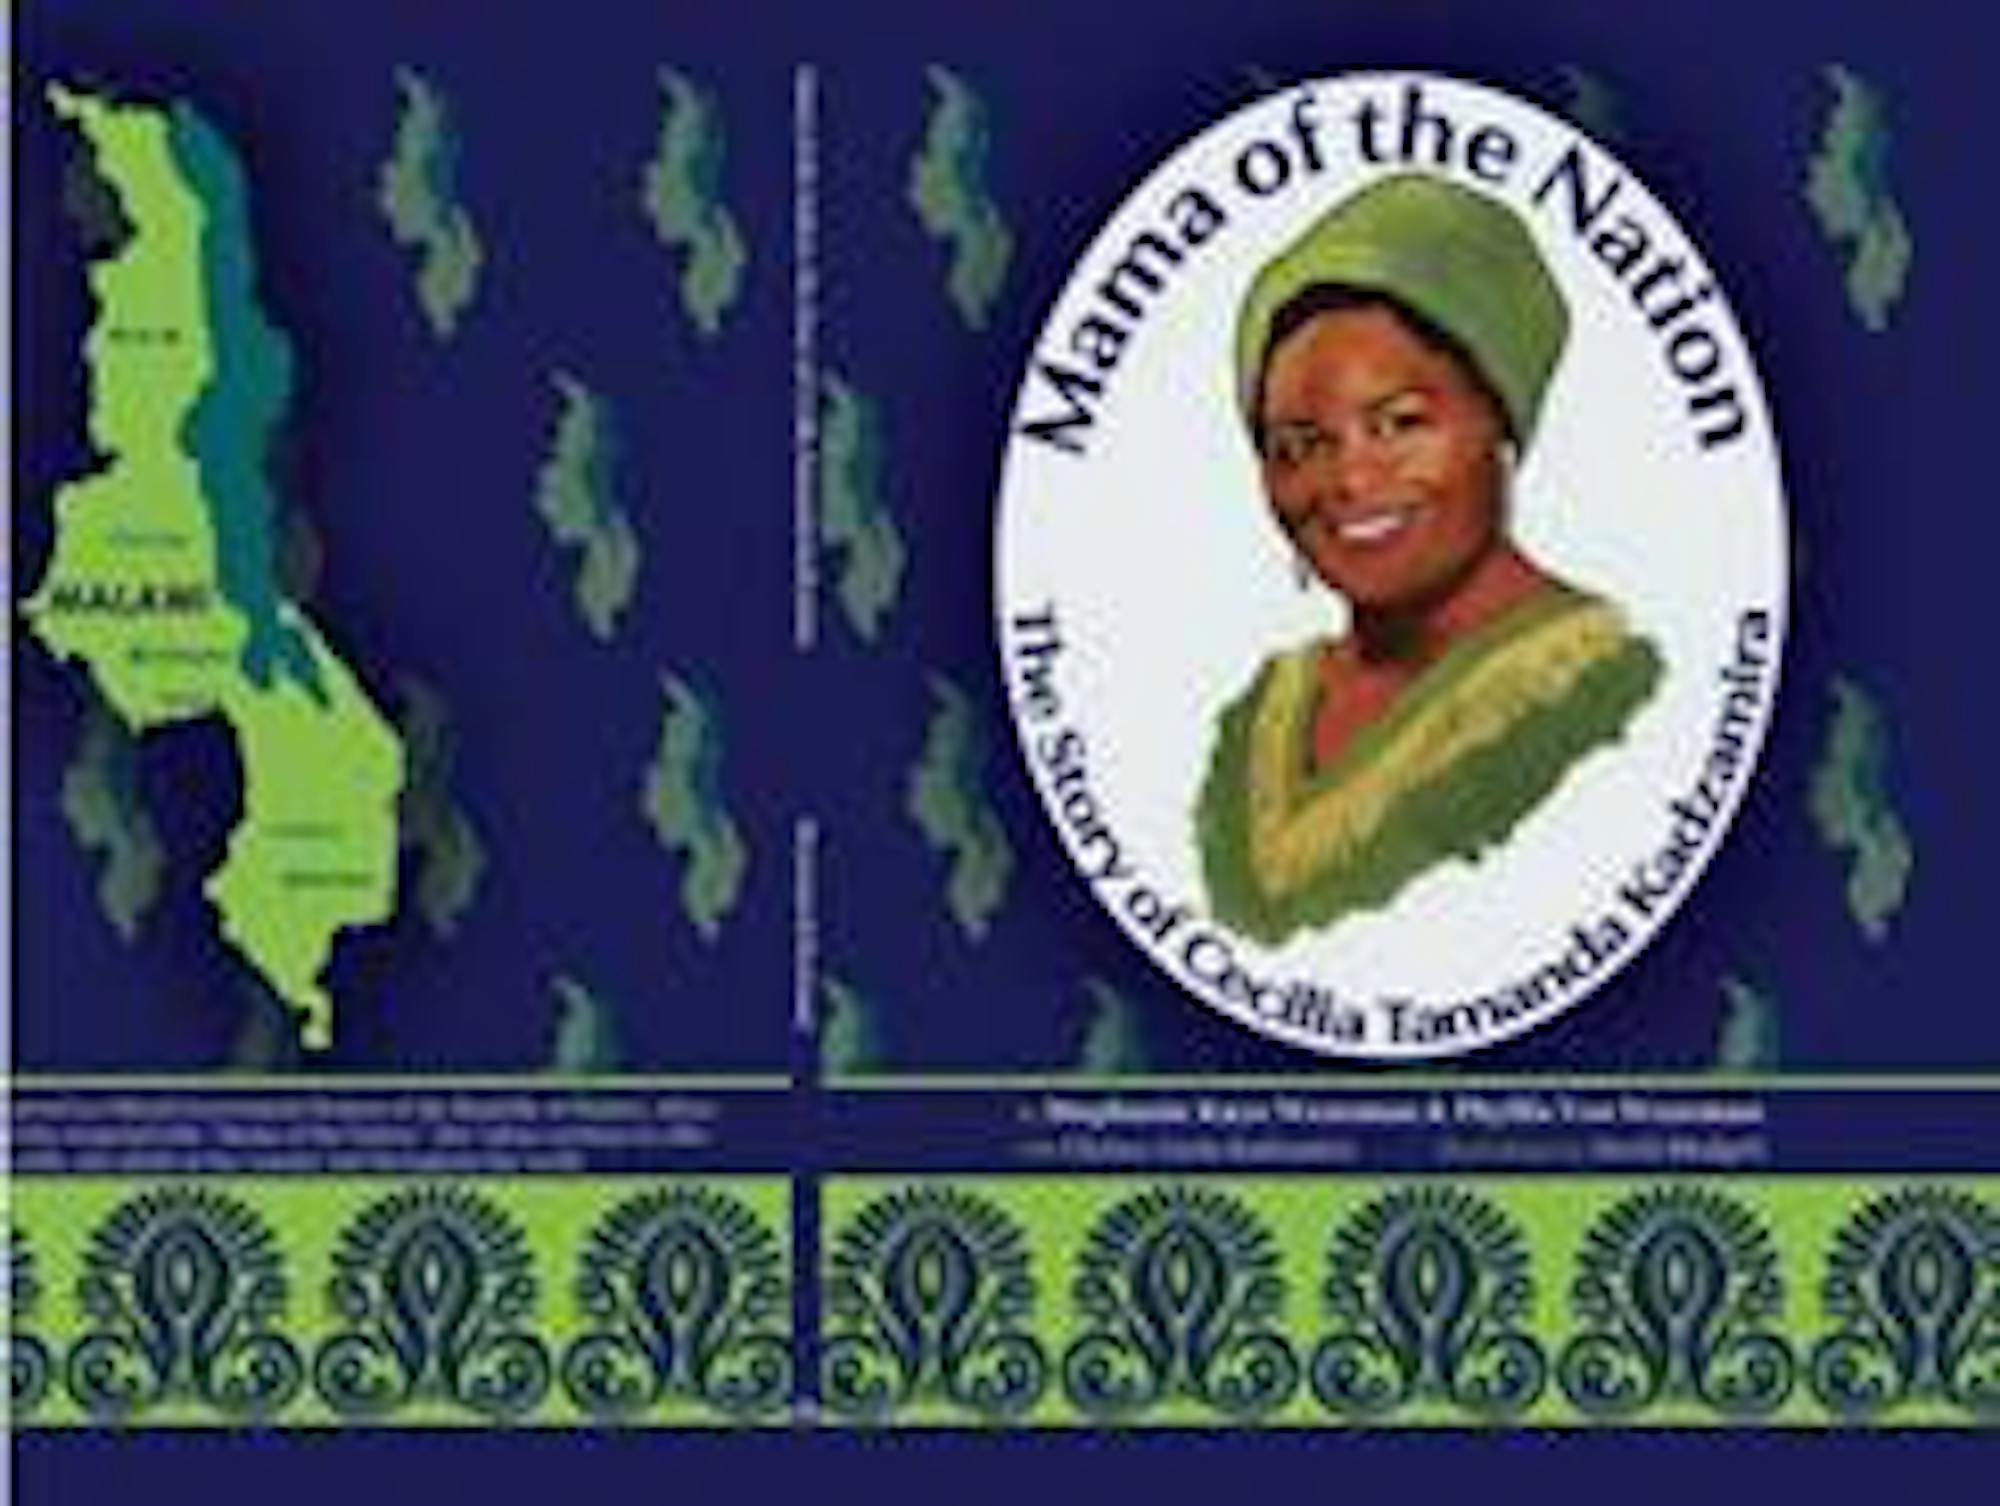 The cover and spine of Mama of the Nation.